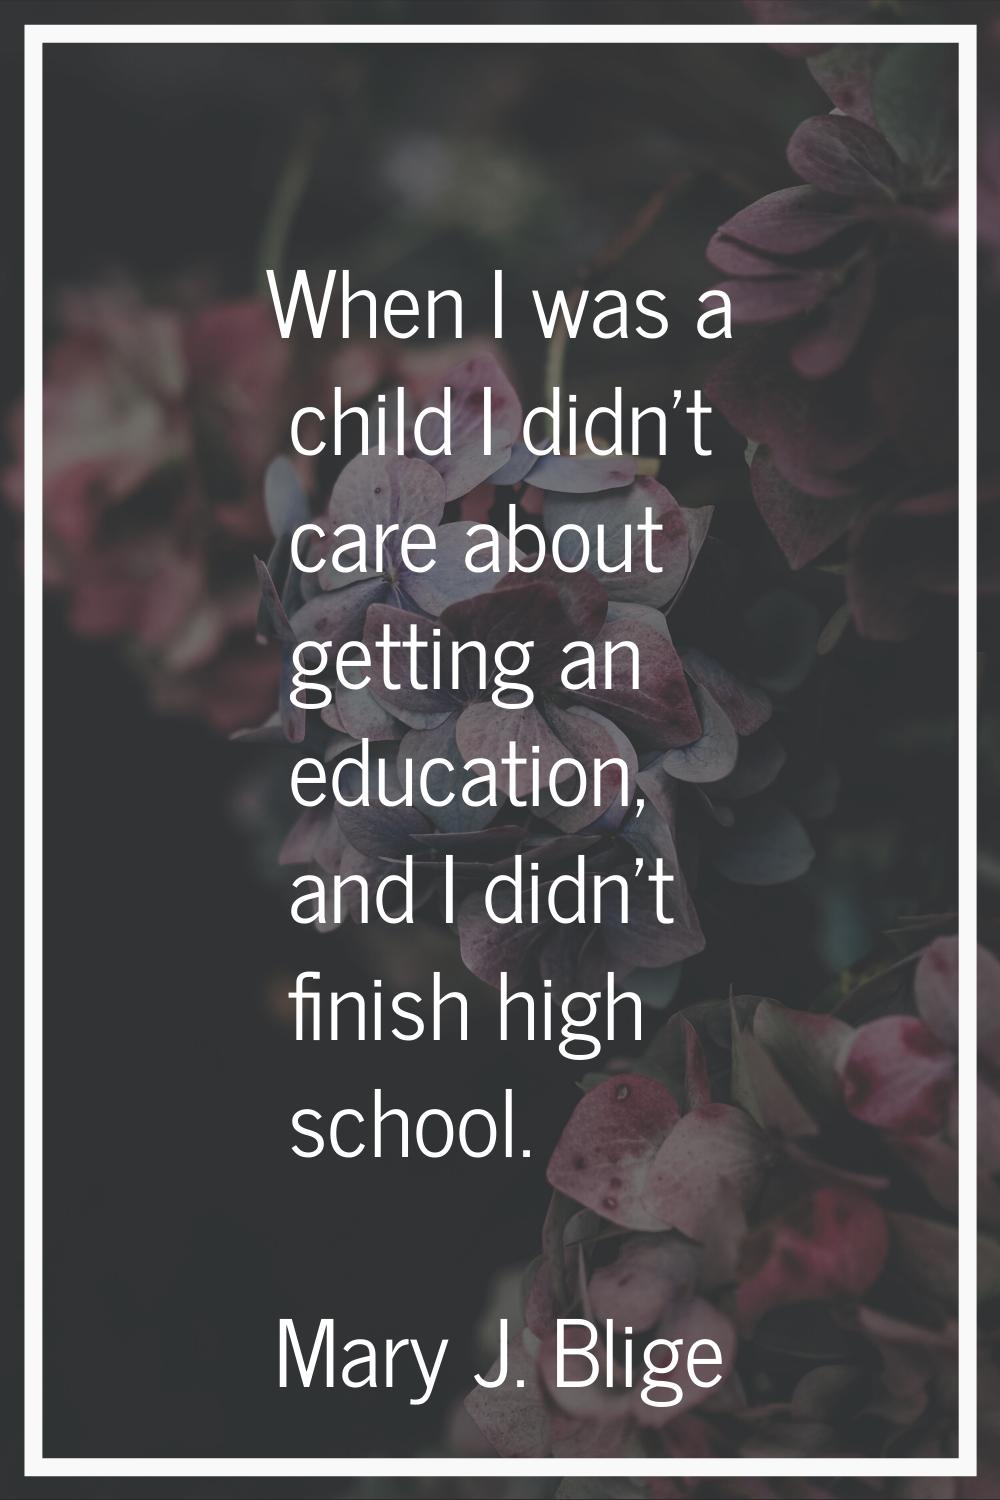 When I was a child I didn't care about getting an education, and I didn't finish high school.